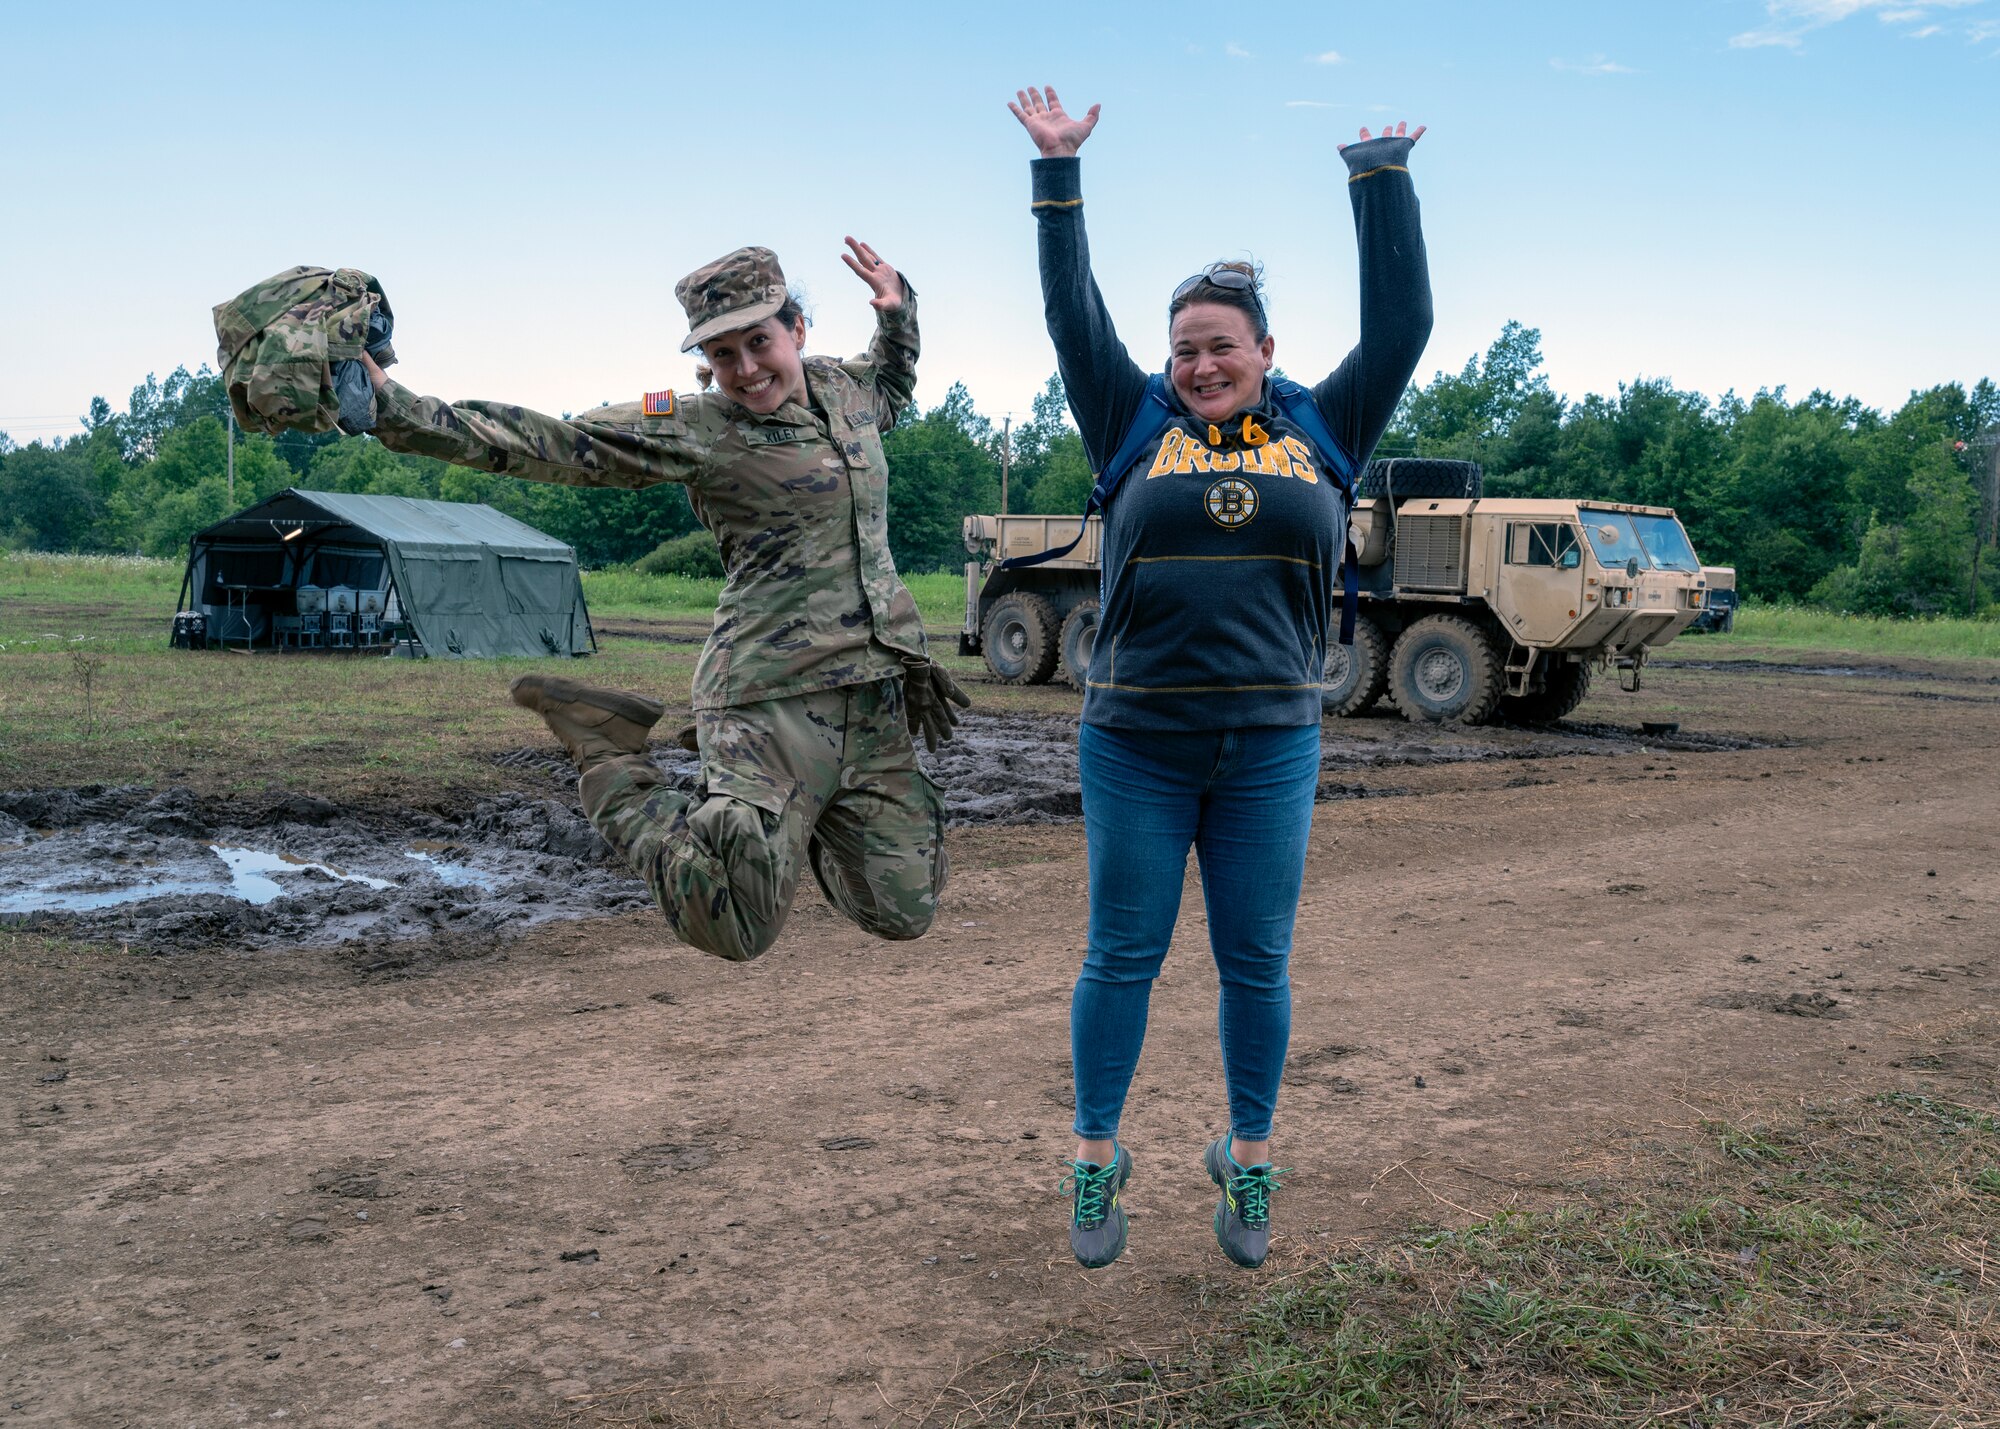 Sgt. Amanda Kiley and Bonnie Montague jump for joy during 3rd Battalion, 197th Field Artillery Brigade's annual training at Fort Drum, New York, July 21, 2022. Kiley and Montague work together in the civilian sector at Community Partners, a community mental health center.